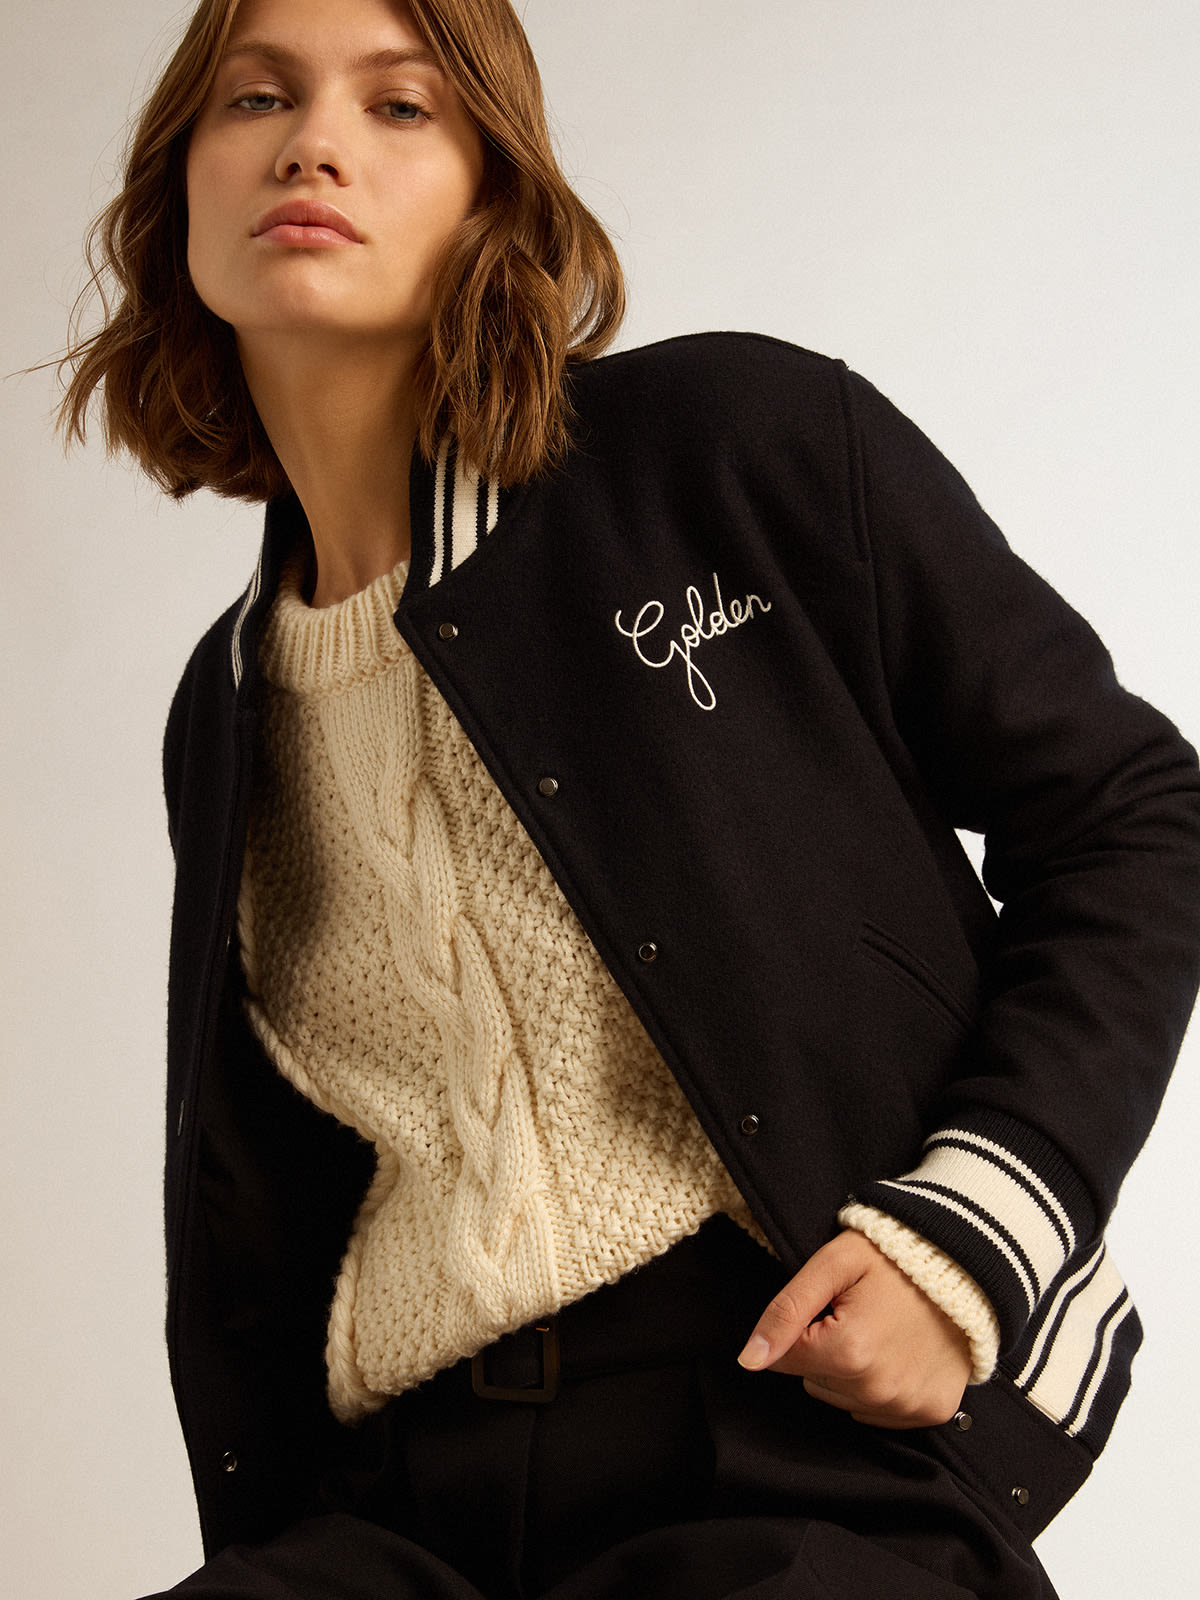 Golden Goose - Bomber jacket in dark blue wool with contrasting white details in 